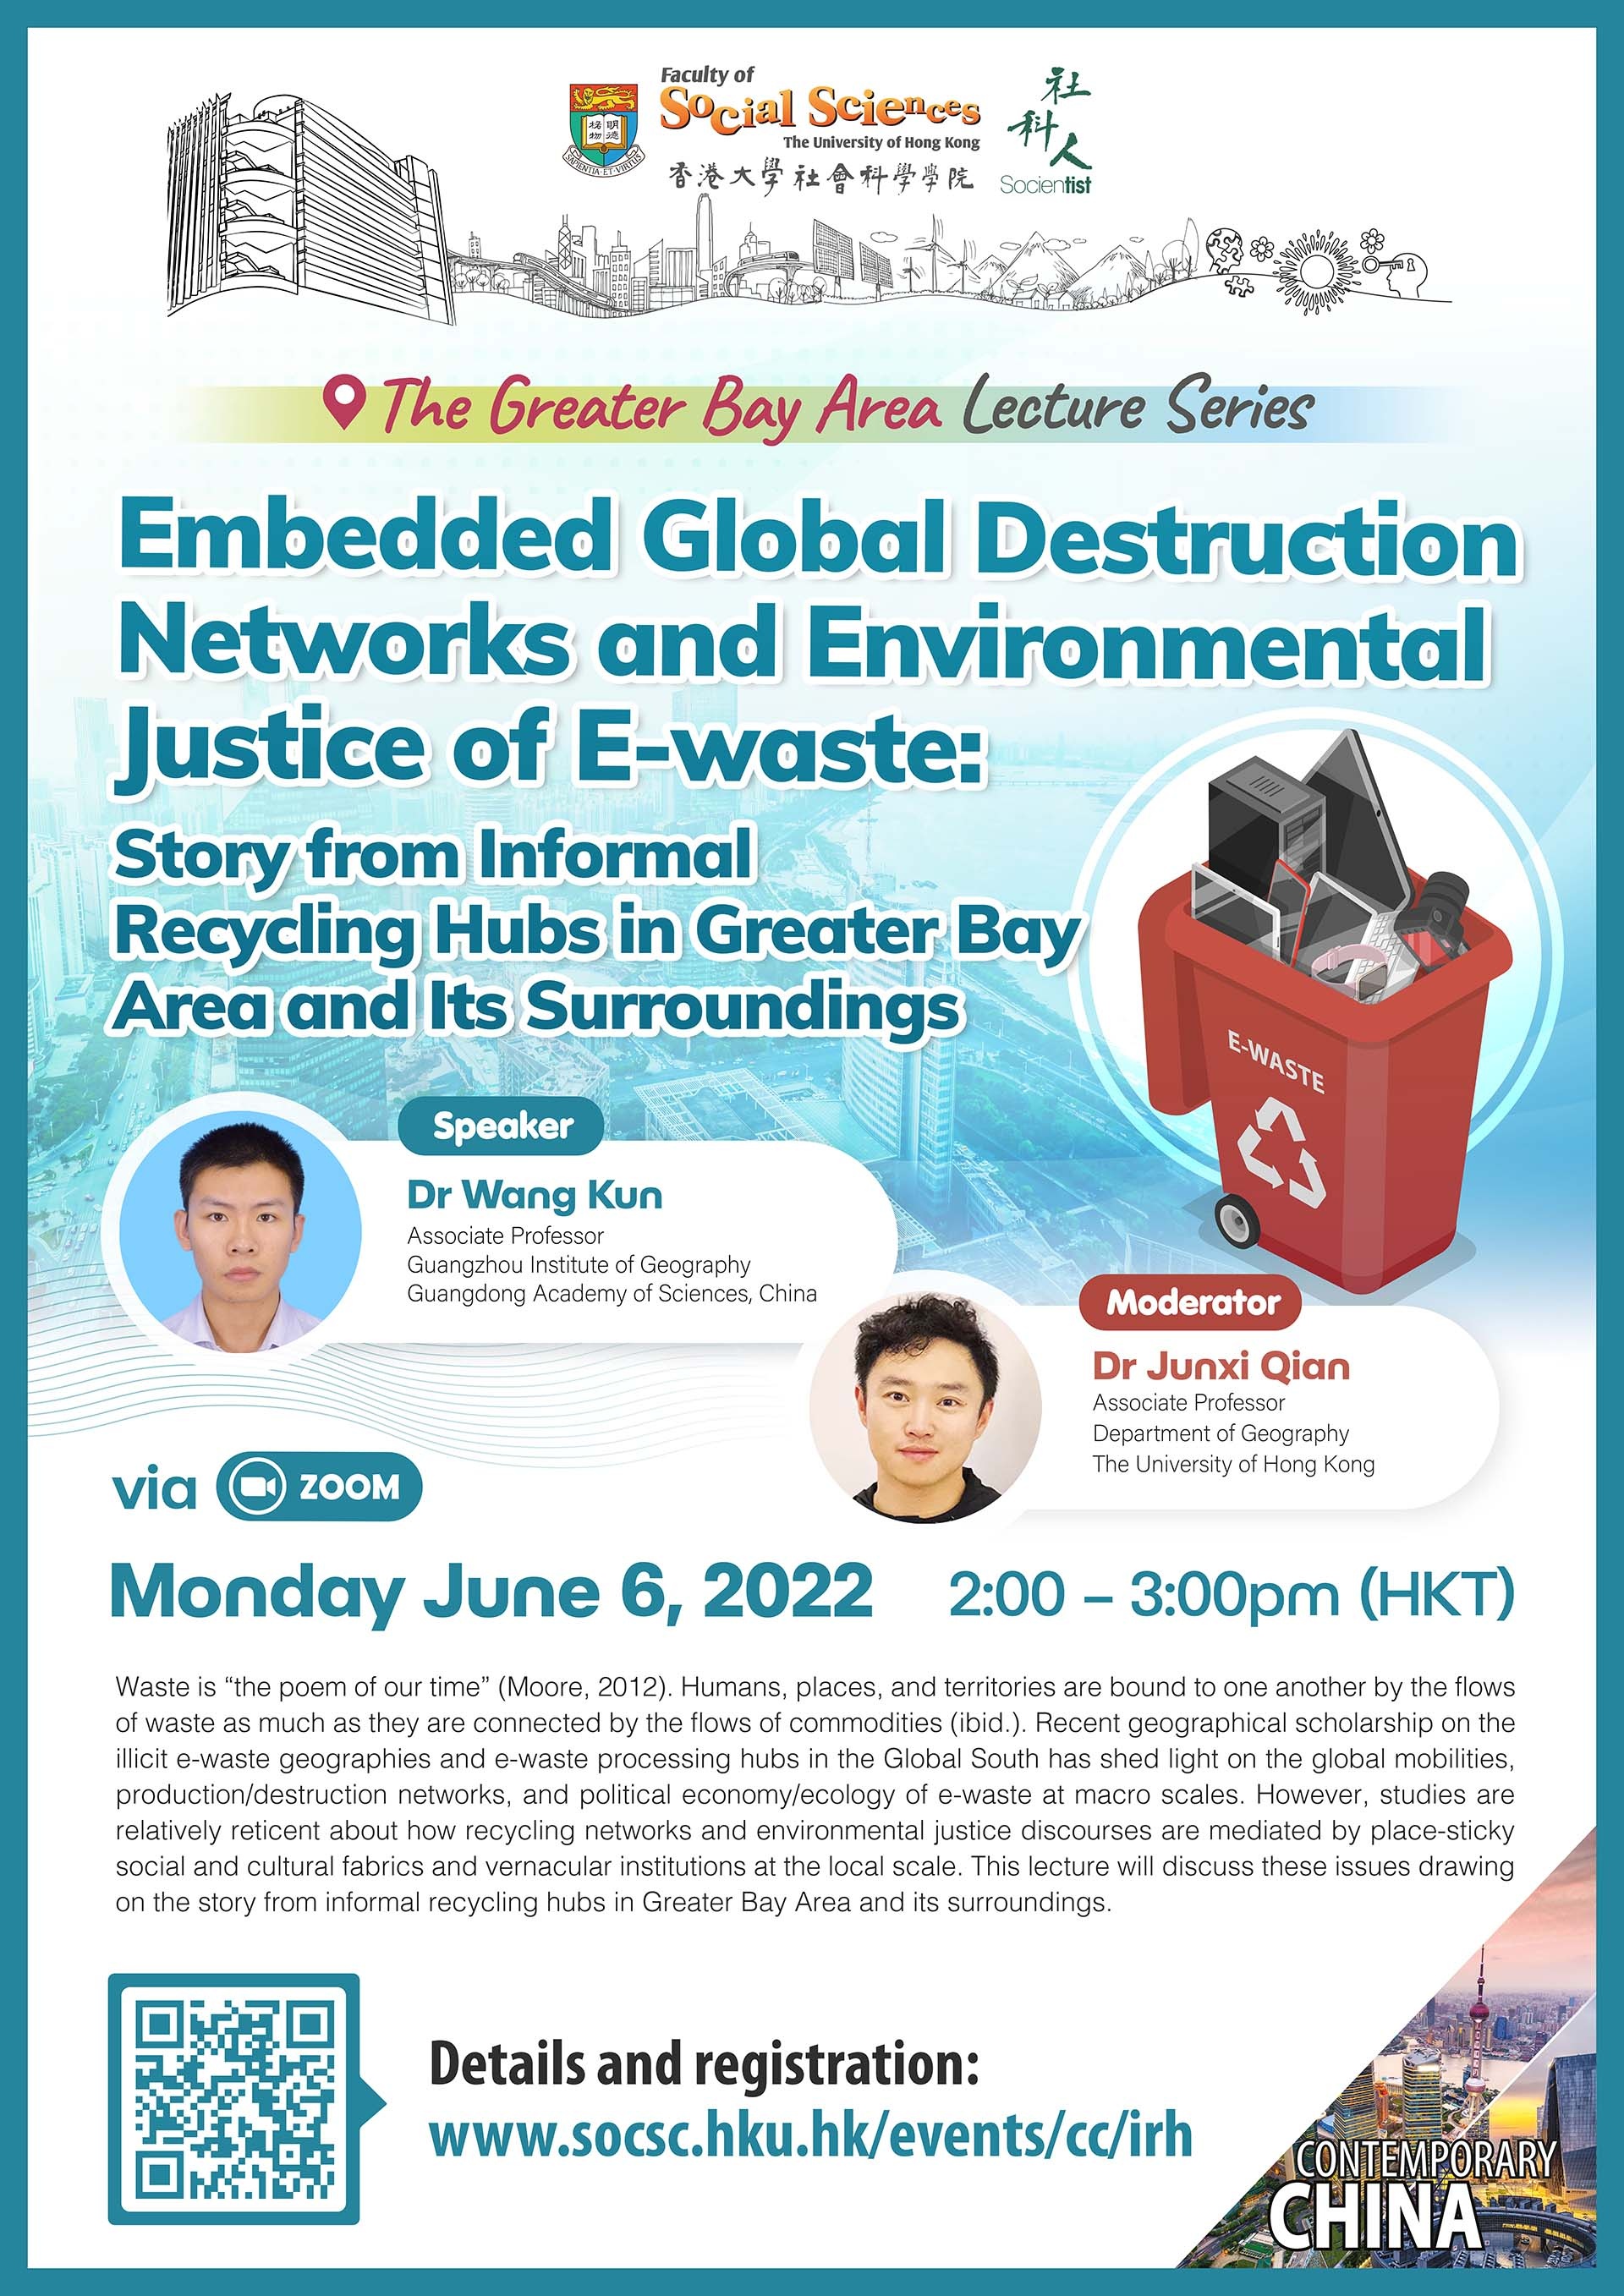 The Greater Bay Area Lecture Series: Embedded Global Destruction Networks and Environmental Justice of E-waste